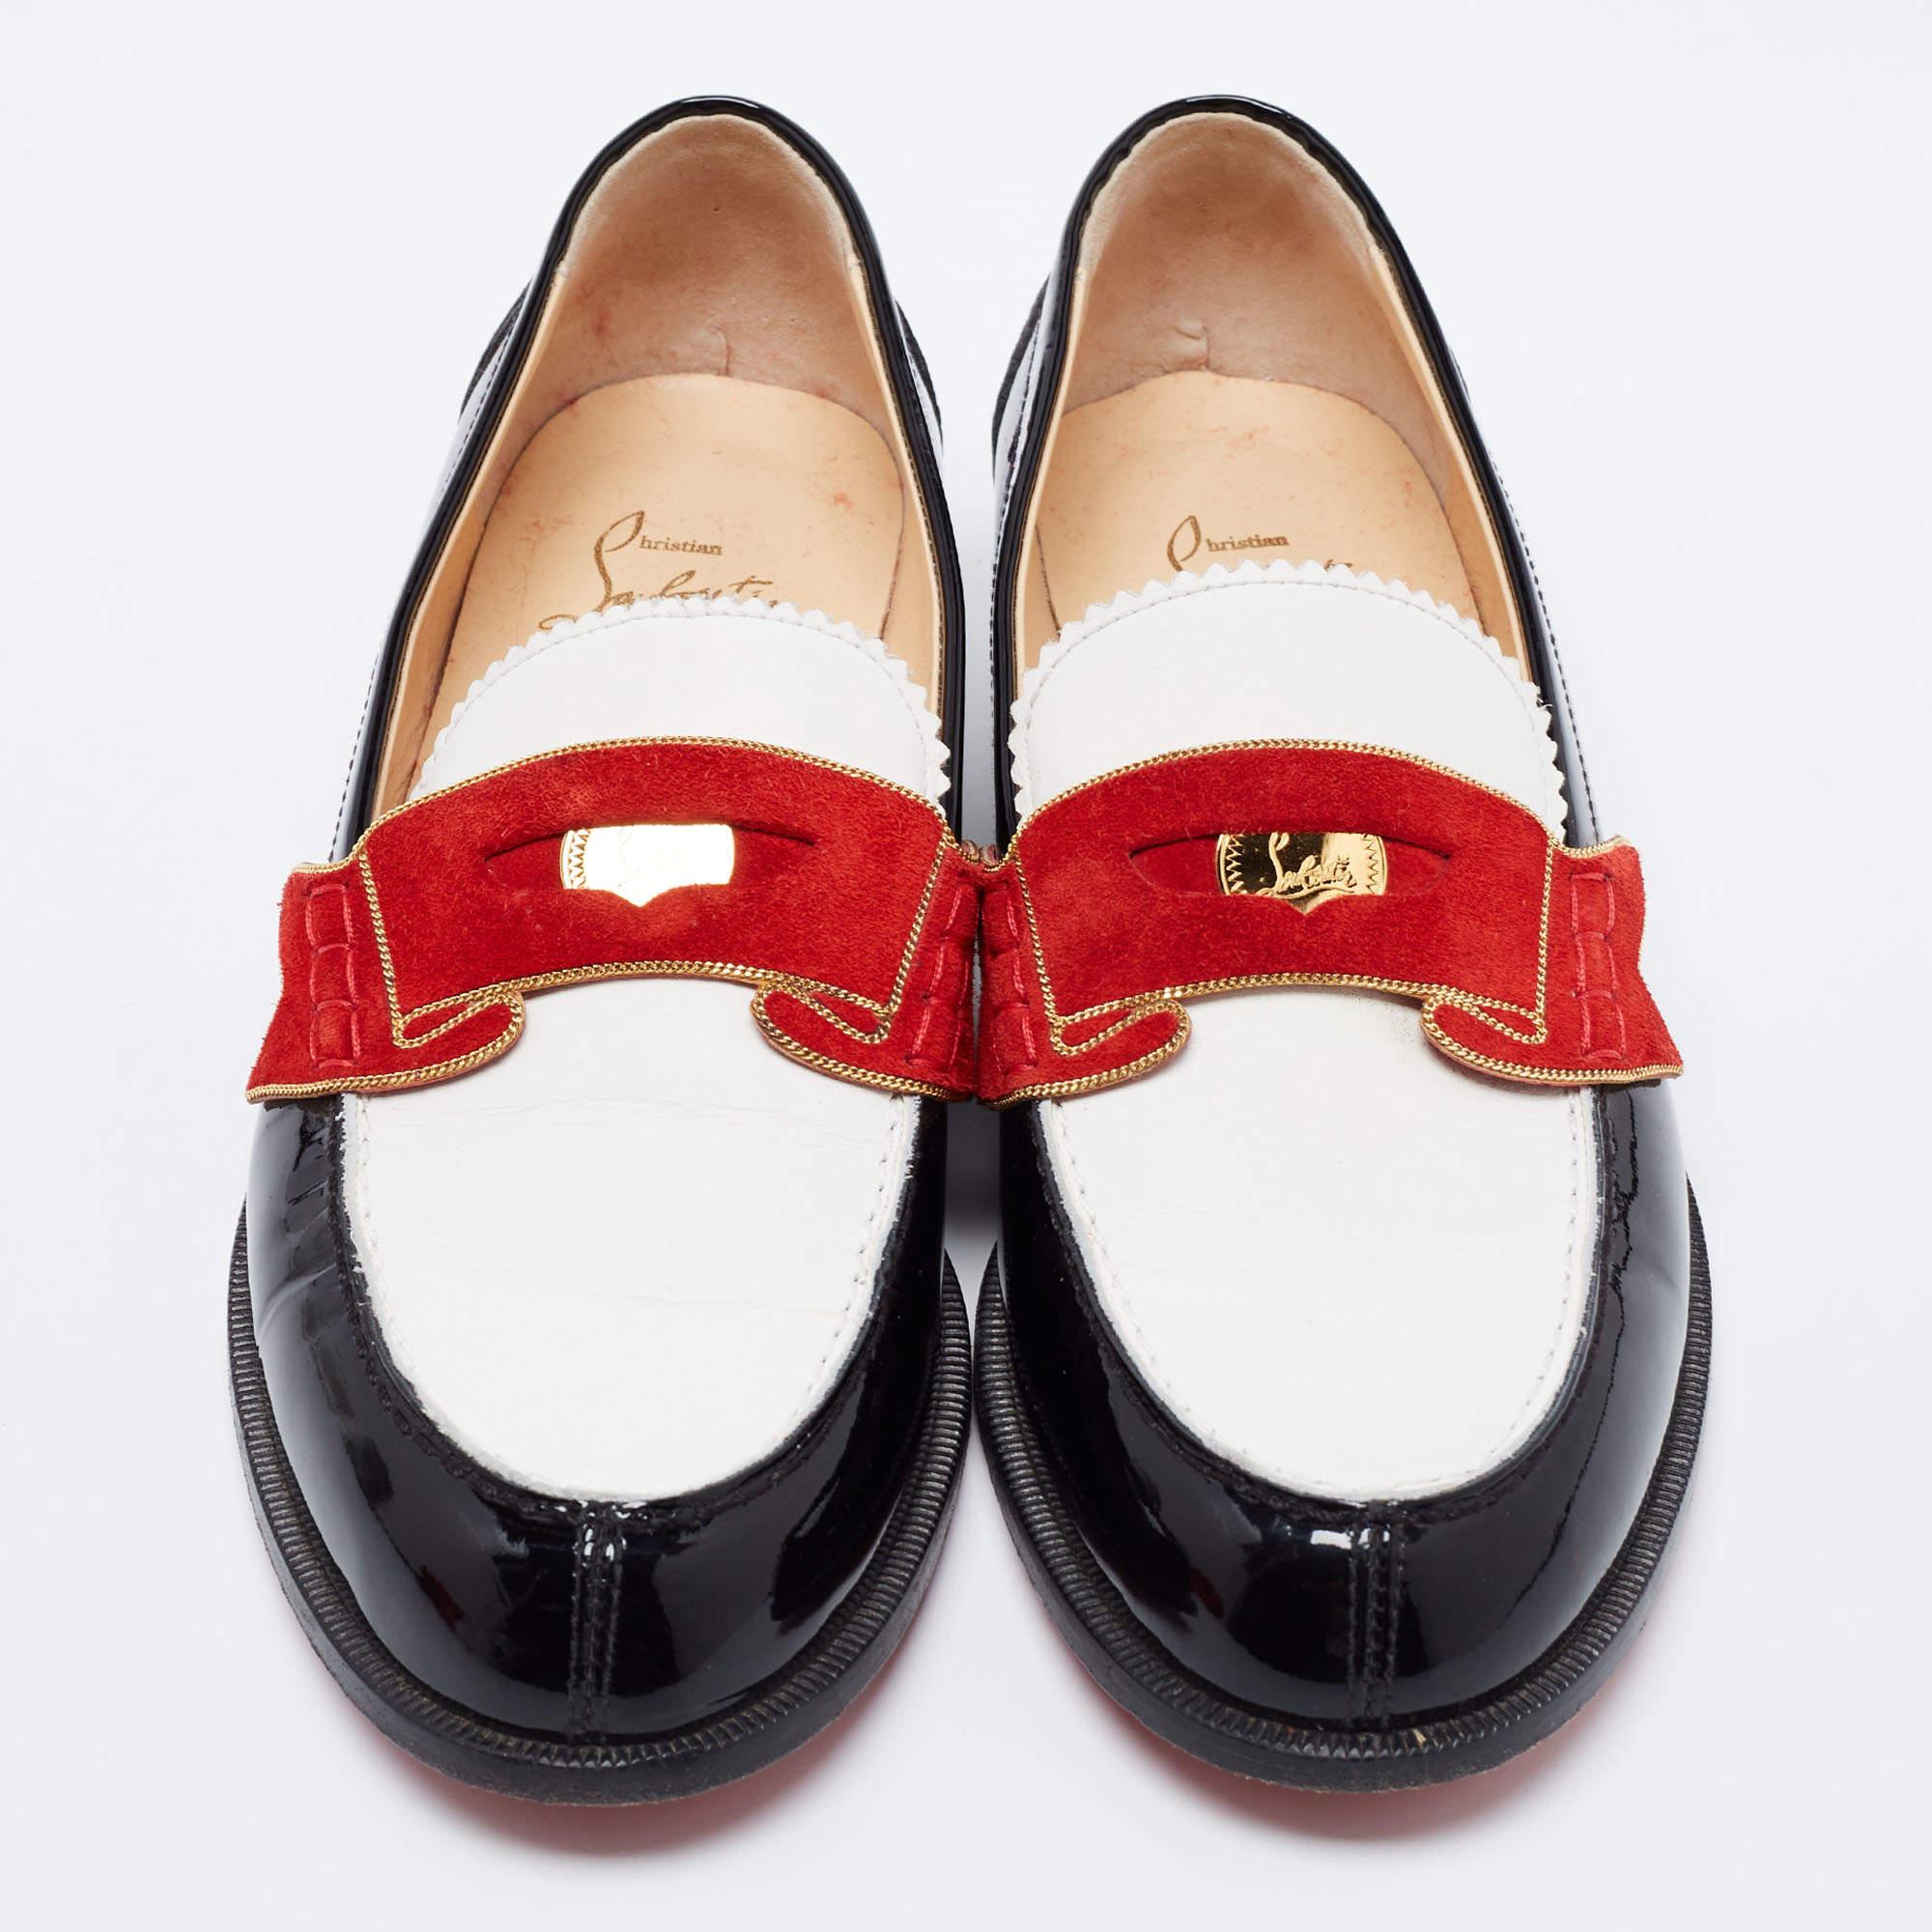 Practical, fashionable, and durable—these designer loafers are carefully built to be fine companions to your everyday style. They come made using the best materials to be a prized buy.
 
Includes: Original Dustbag

